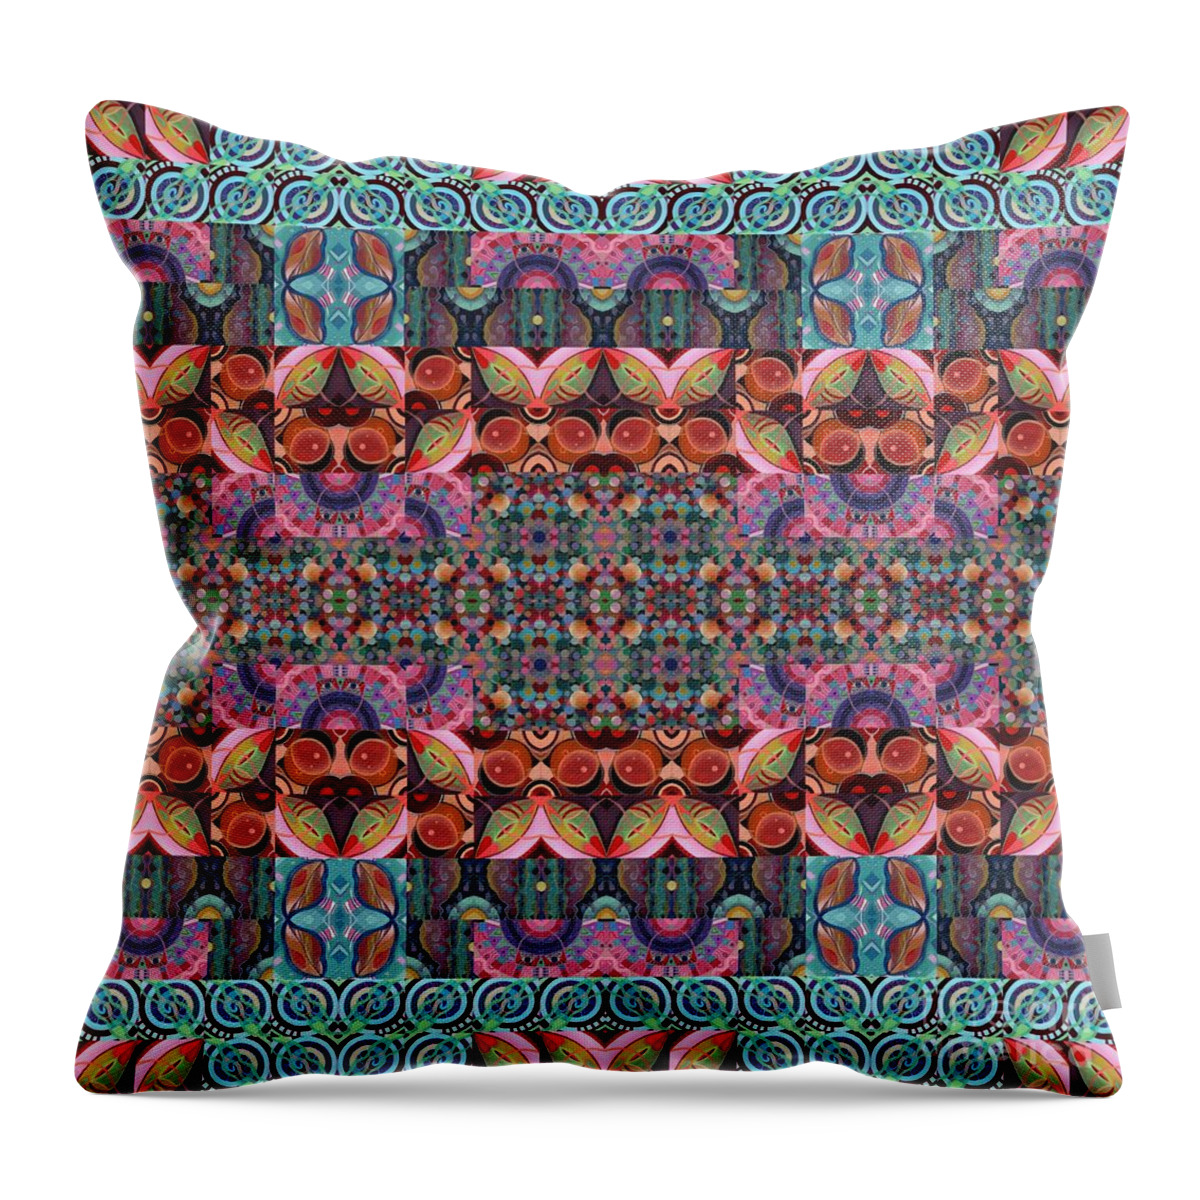 Organic Abstraction Throw Pillow featuring the mixed media T J O D Mandala Series Puzzle 7 Arrangement 3 Multiplied by Helena Tiainen